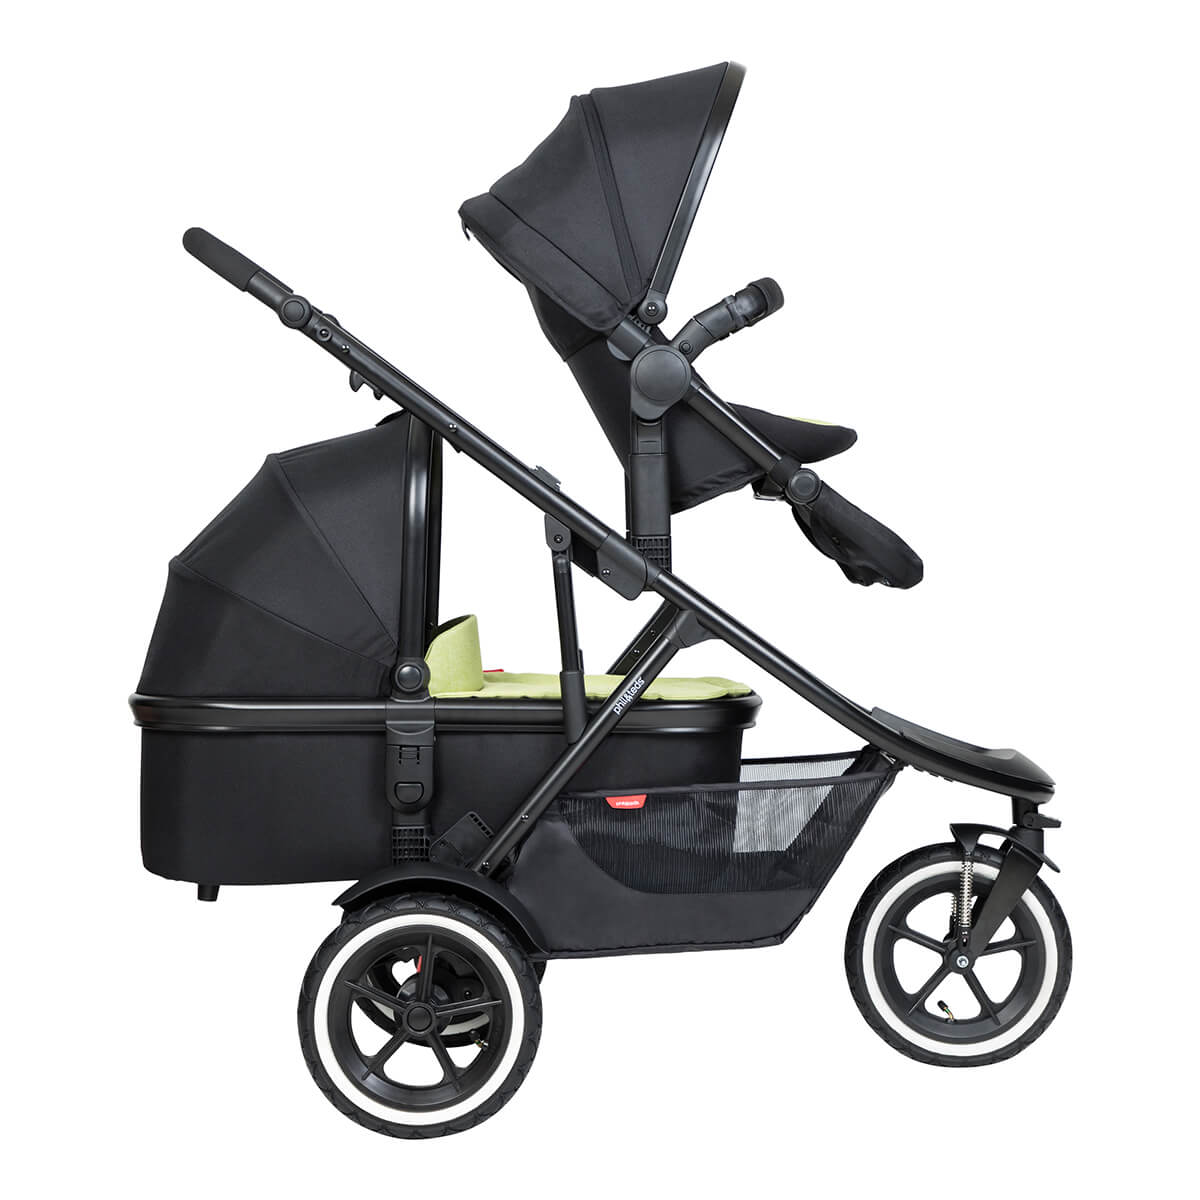 https://cdn.accentuate.io/7552750420138/19793939726506/philteds-sport-buggy-with-double-kit-extended-clip-and-snug-carrycot-side-view-v1664411443186.jpg?1200x1200